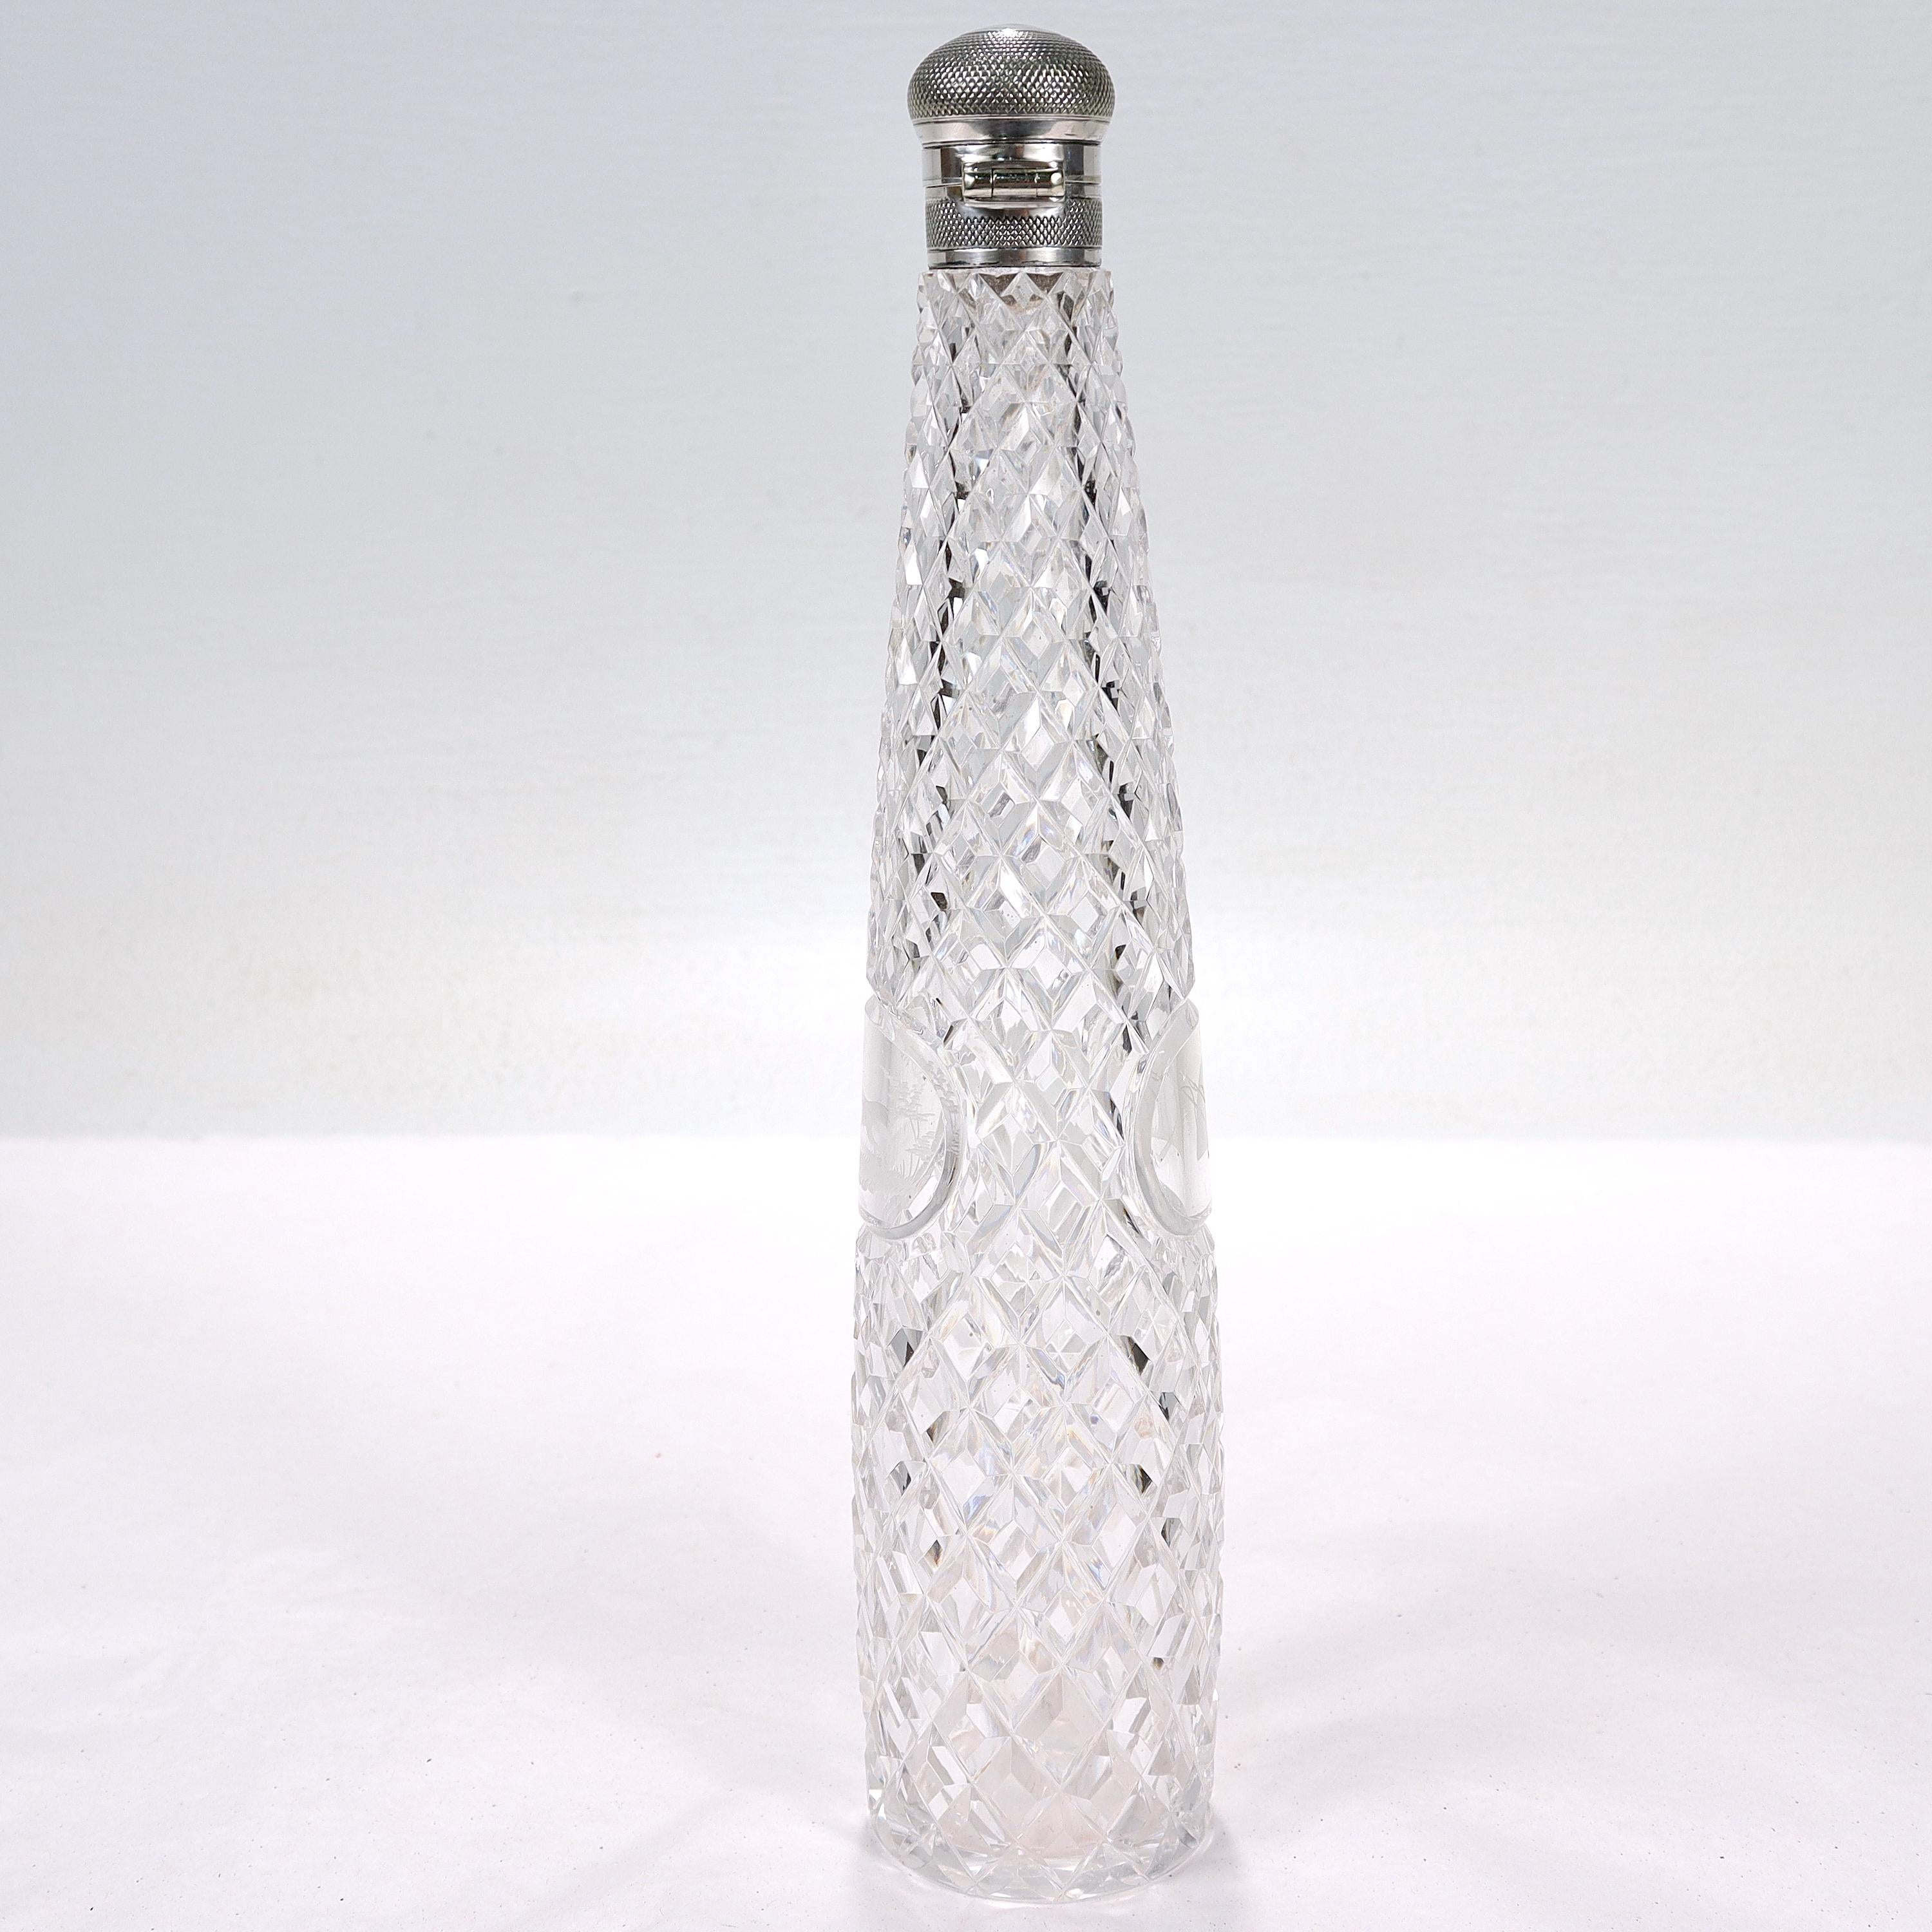 A fine antique silver-topped cut glass hunting flask.

With a narrow tapering cut glass body with a diamond pattern terminating in a screw-top integral sterling silver lid.

There are 2 small cartouches on either side - one depicts a fox and the